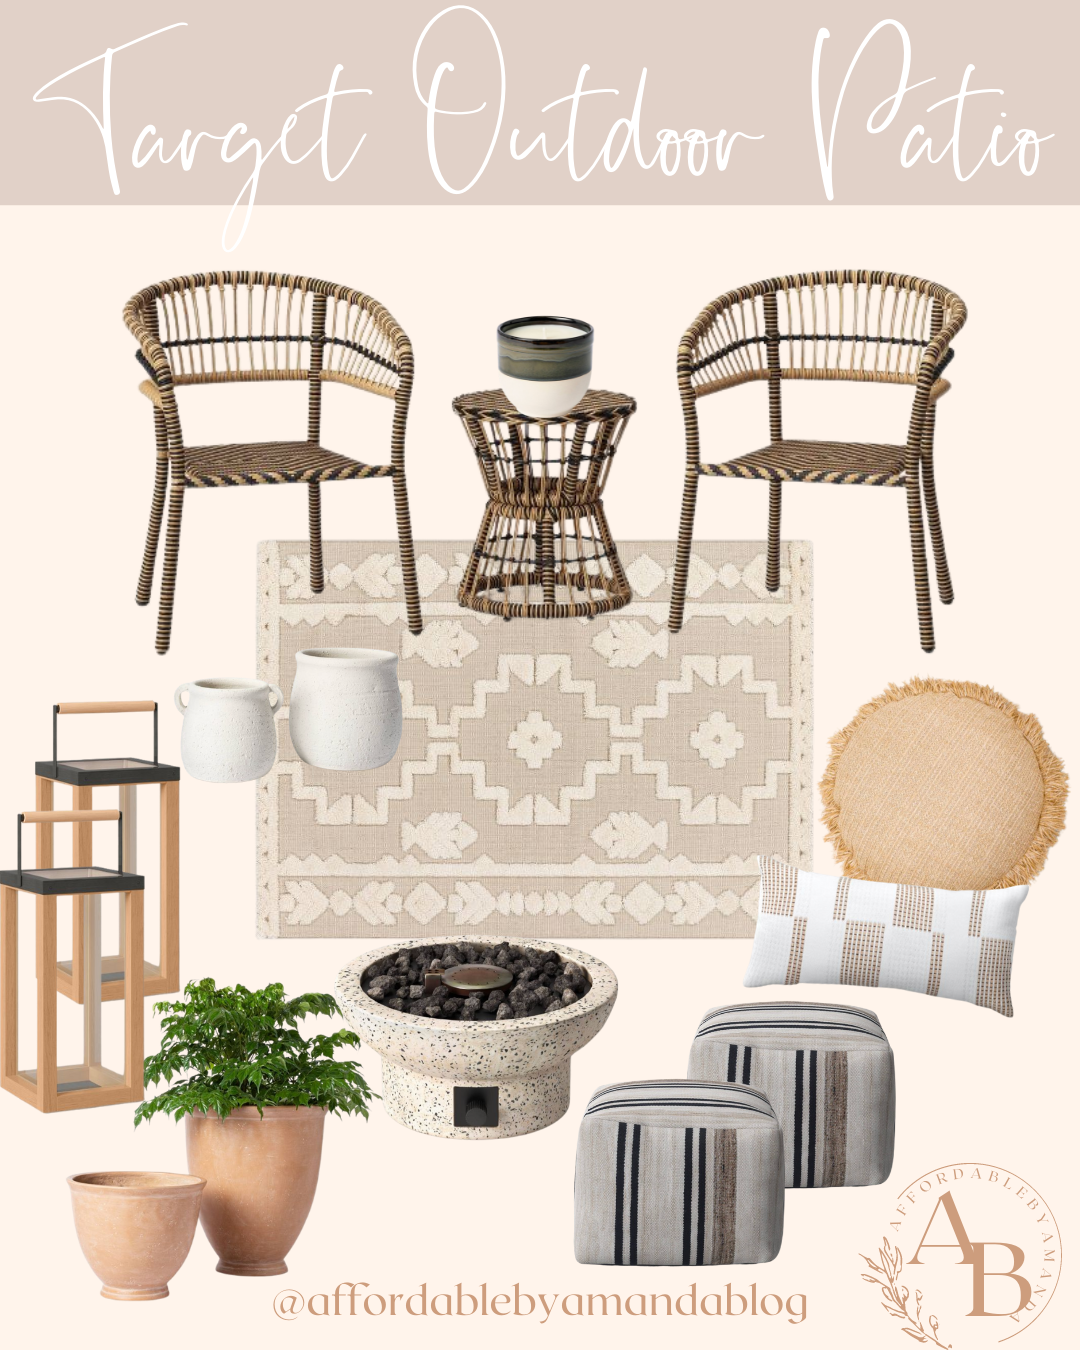 Outdoor Patio Furniture Inspiration | Affordable by Amanda